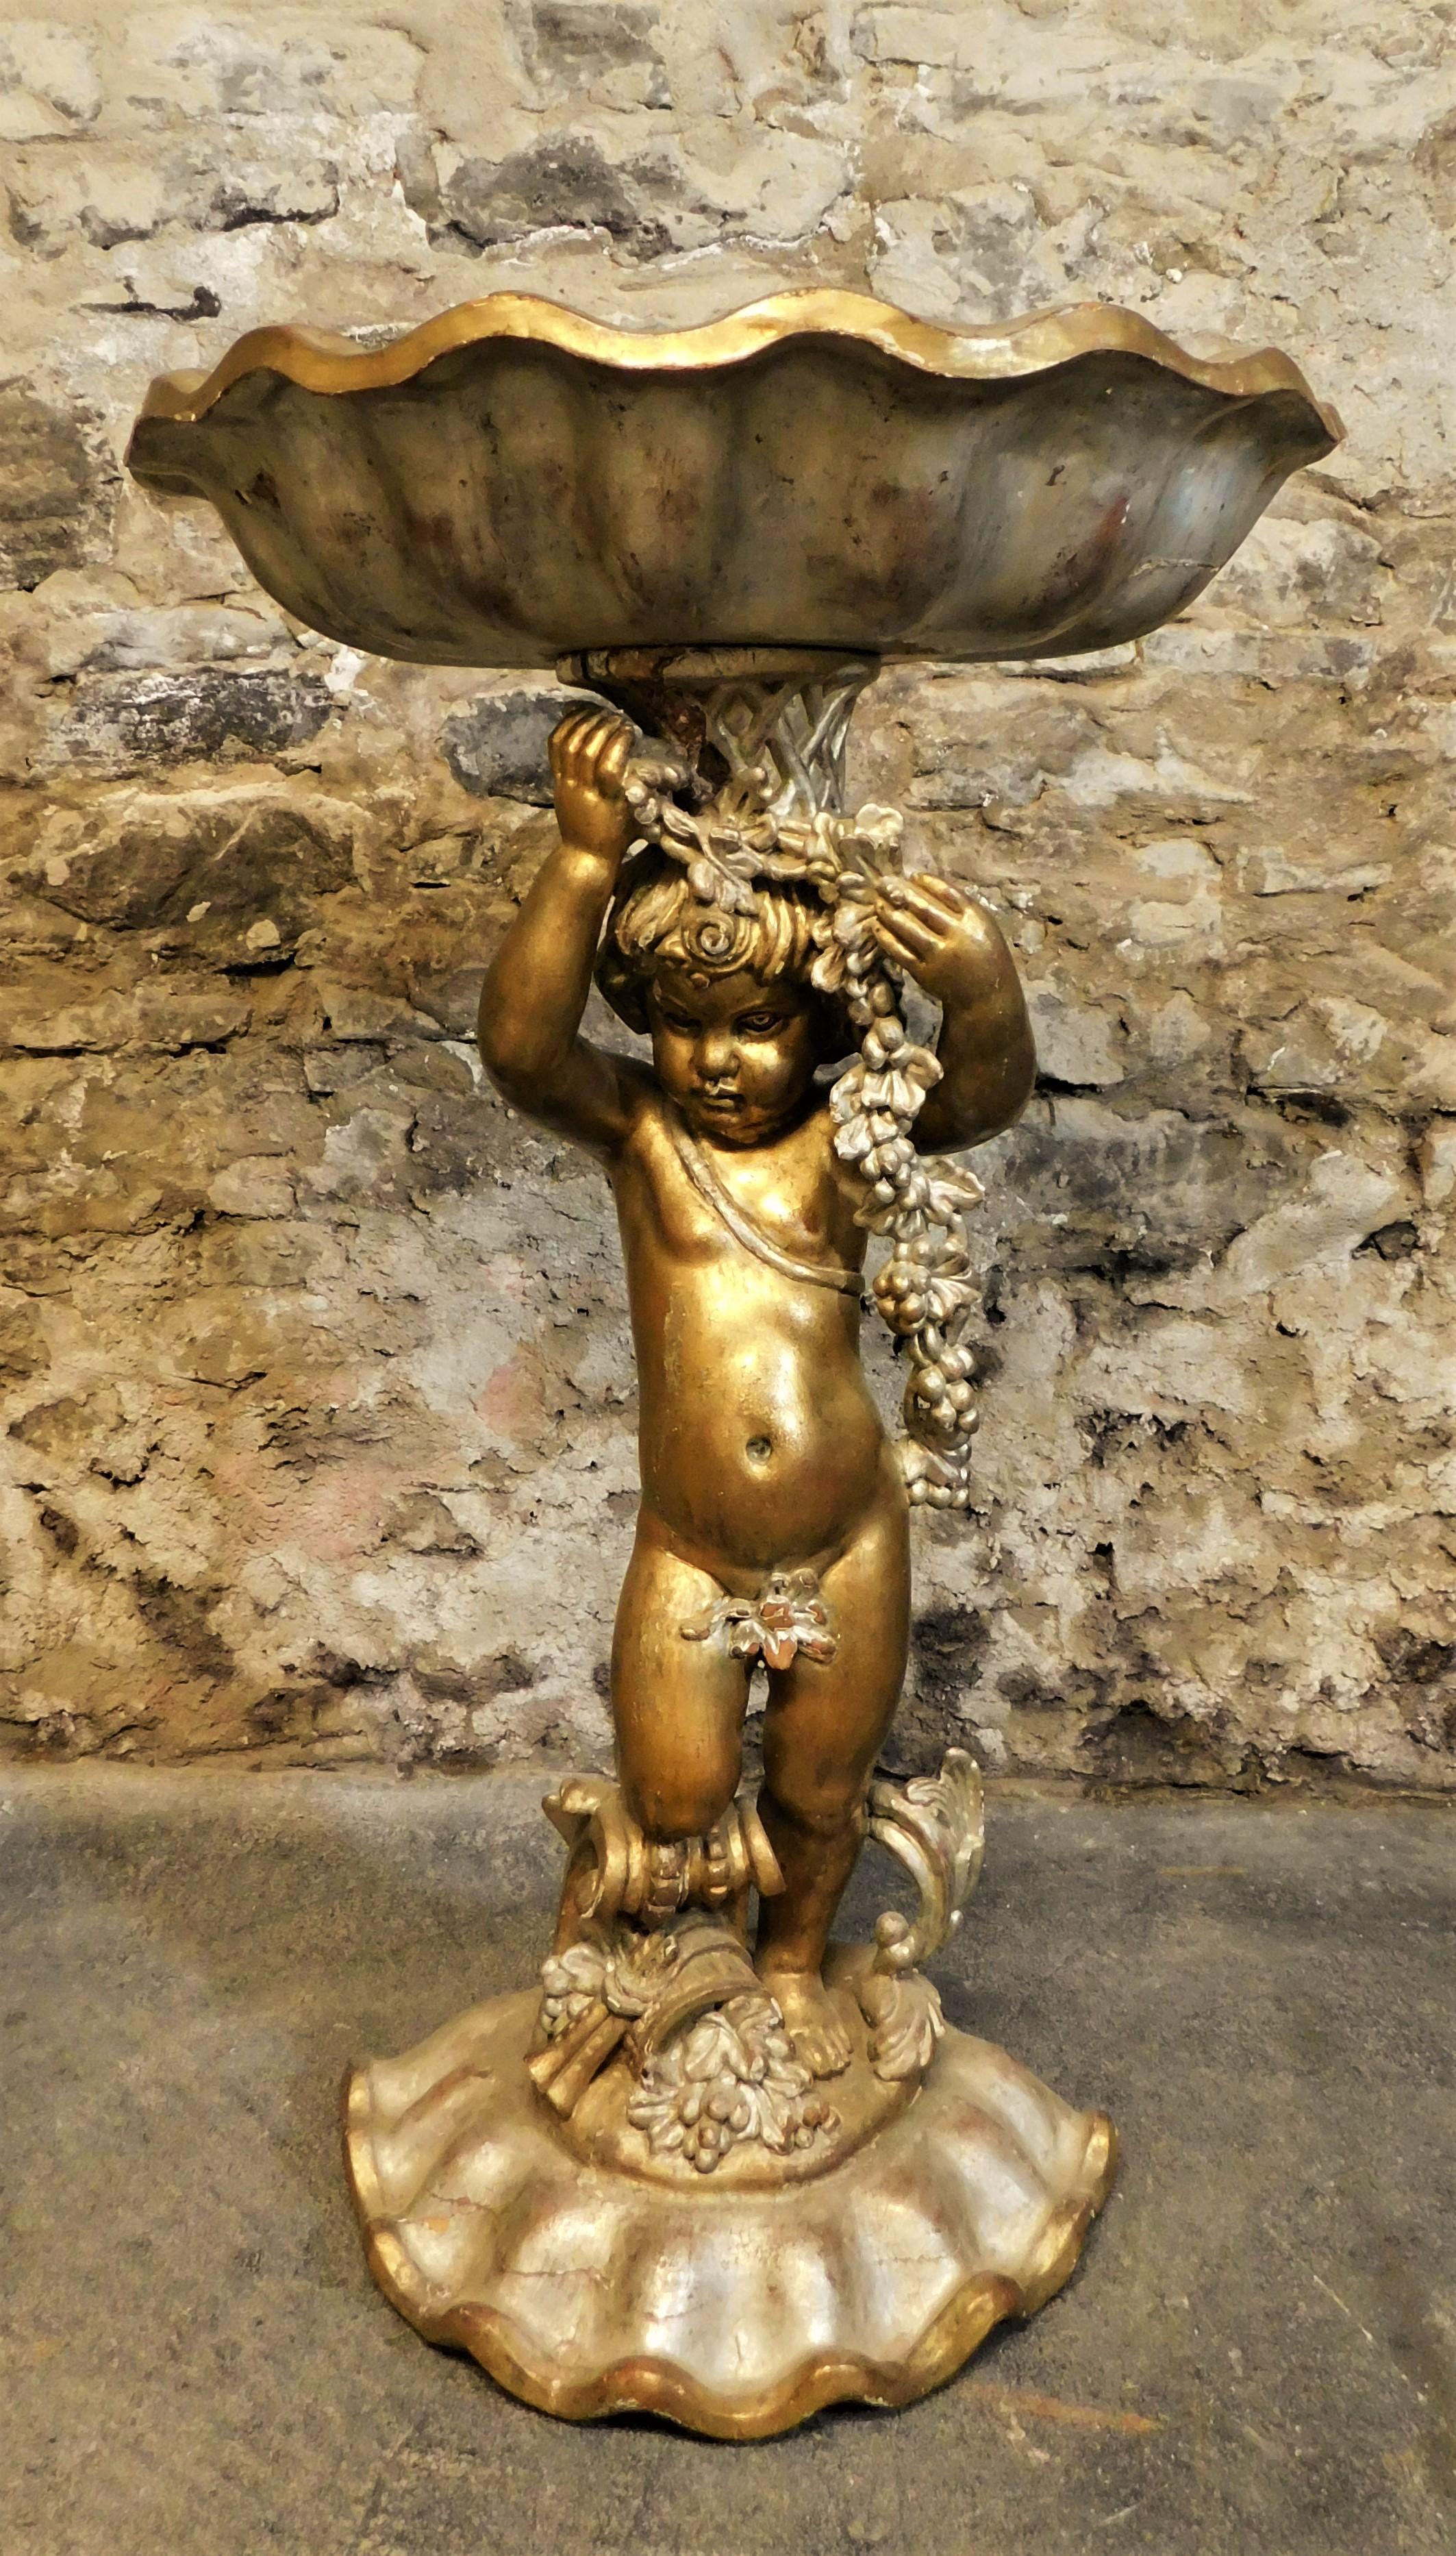 Beautiful large Italian carved wooden bird bath or garden planter of a cherub/child holding a sea shell with a shell base. Nice patina on the copper plate insert on the top holding shell and is nicely painted. Lots of small chips, small crack, paint